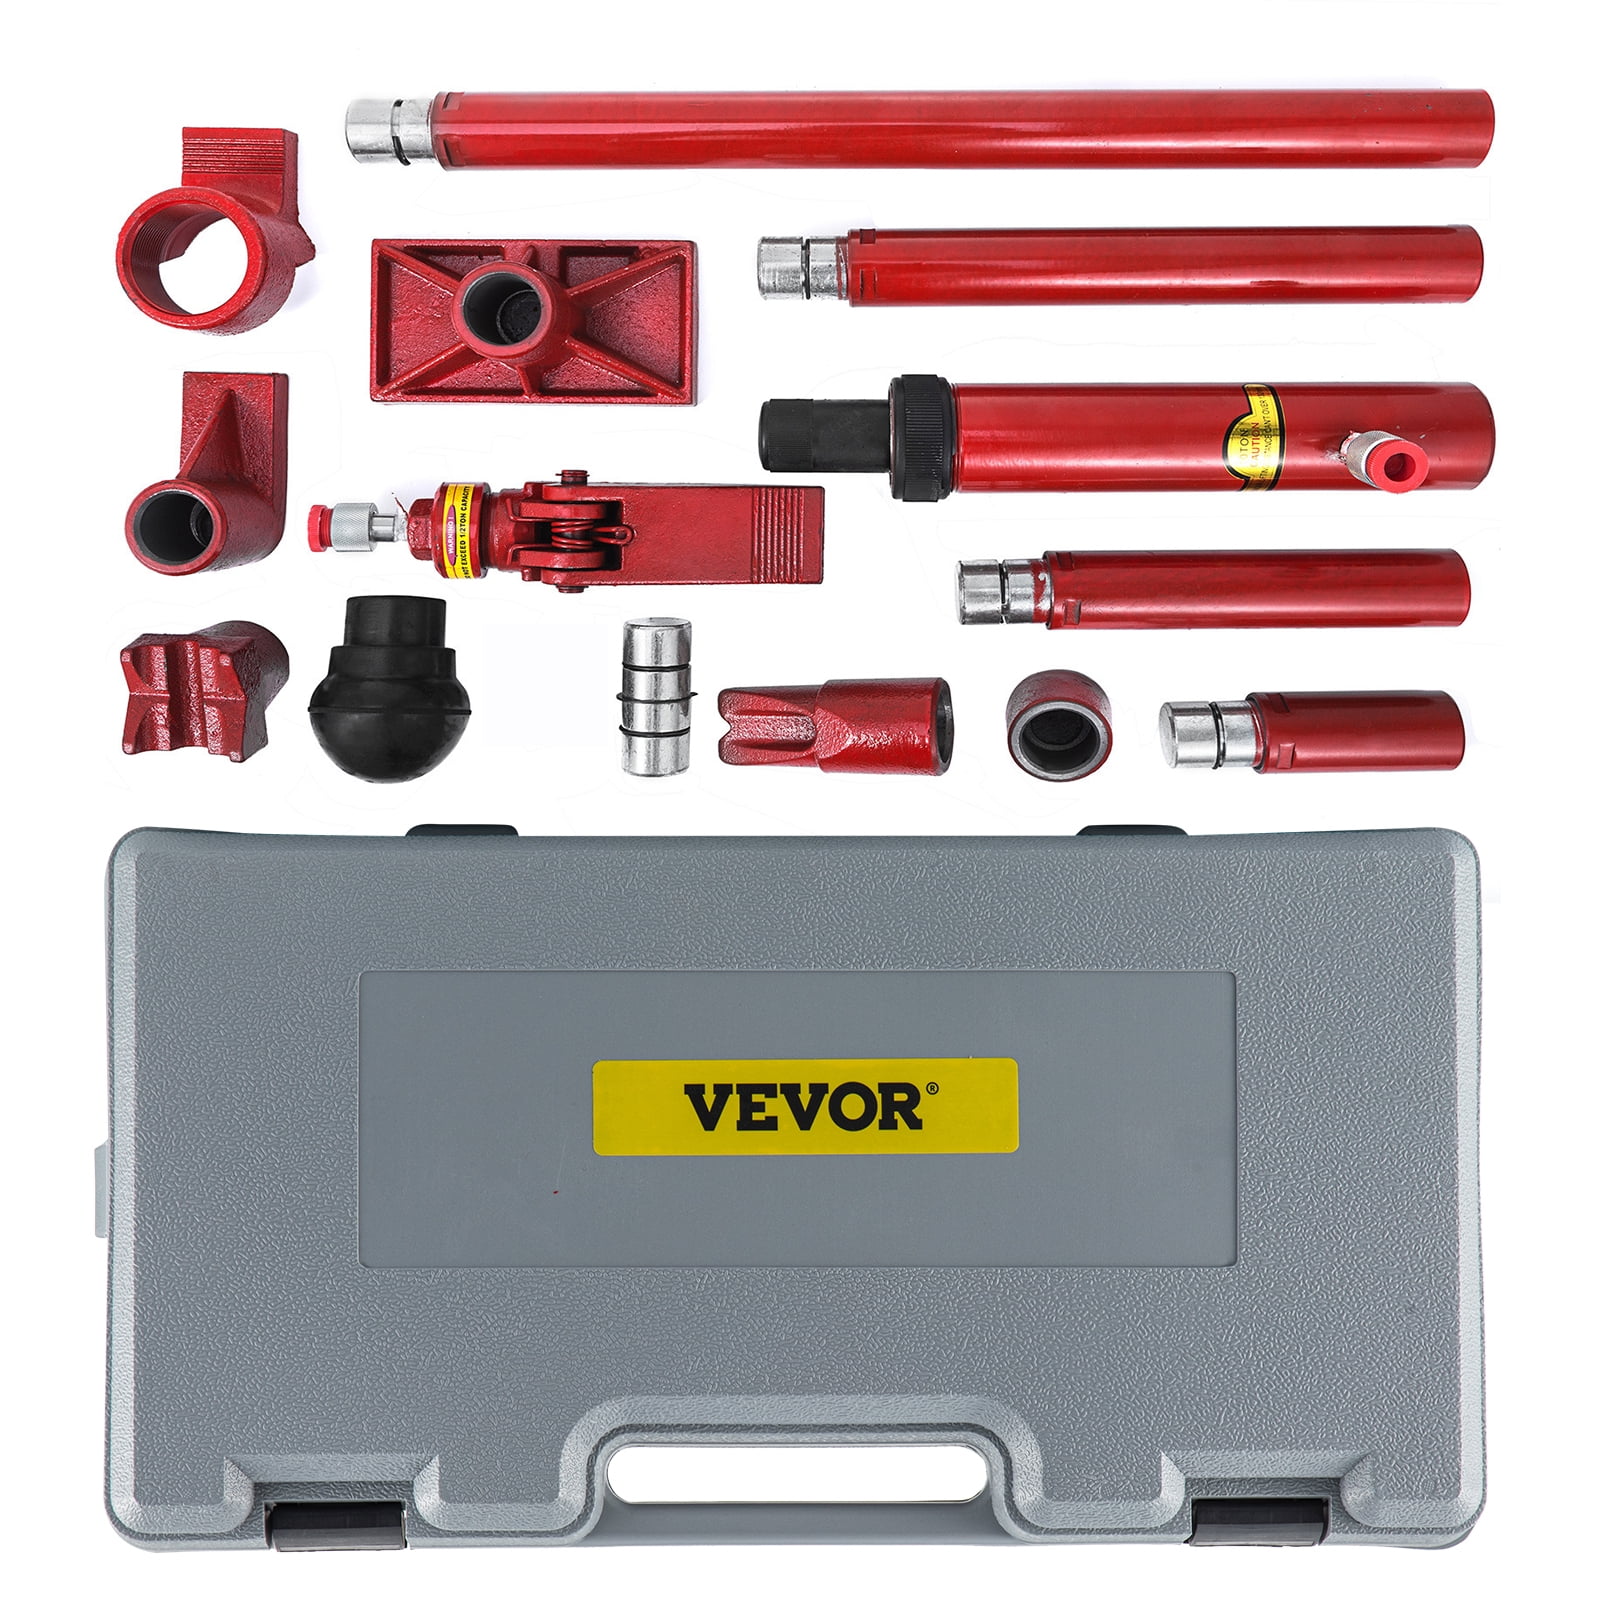 10 Ton Porta Power Kit 78.7 inch Oil Hose Hydraulic Car Jack Ram for Loadhandler Truck Bed Unloader Farm and Hydraulic Equipment Construction 2M Red 